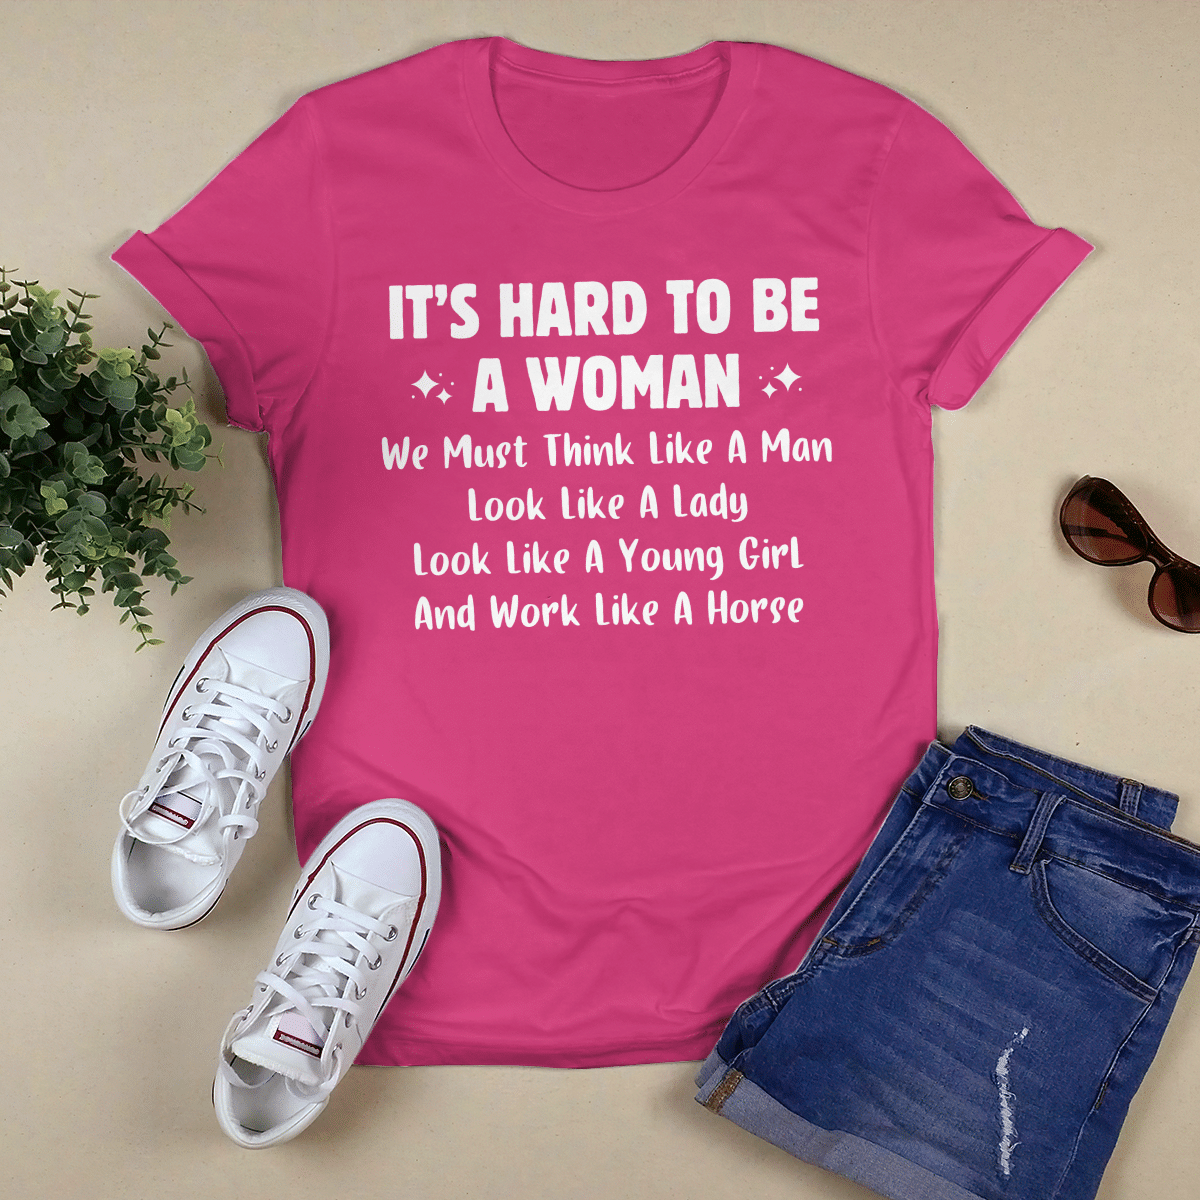 It_s Hard To Be A Woman shirt